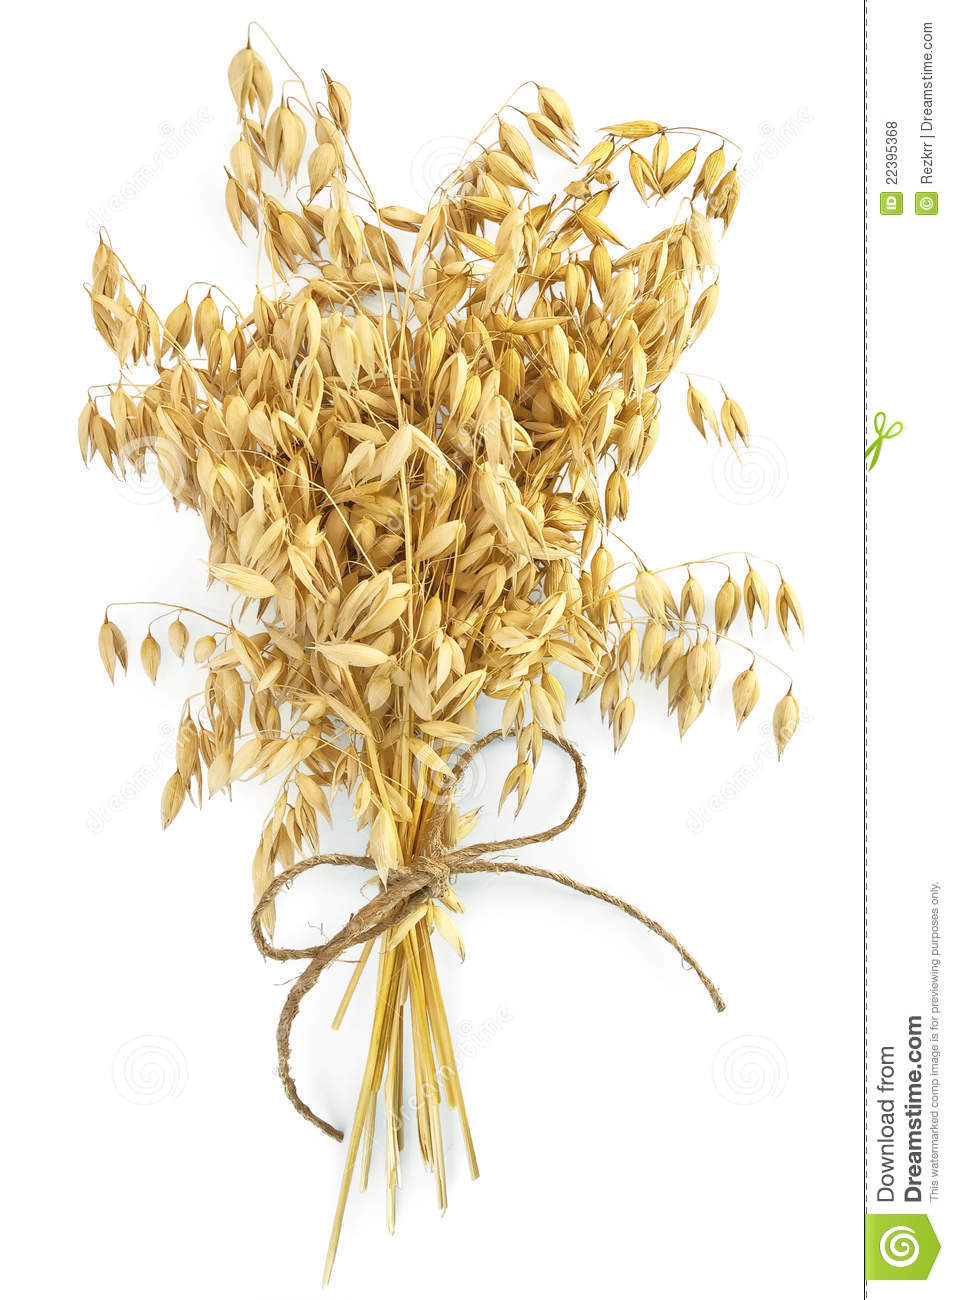 Sheaf Of Stalks Of Oats Tied With Twine With A Light Shade On White